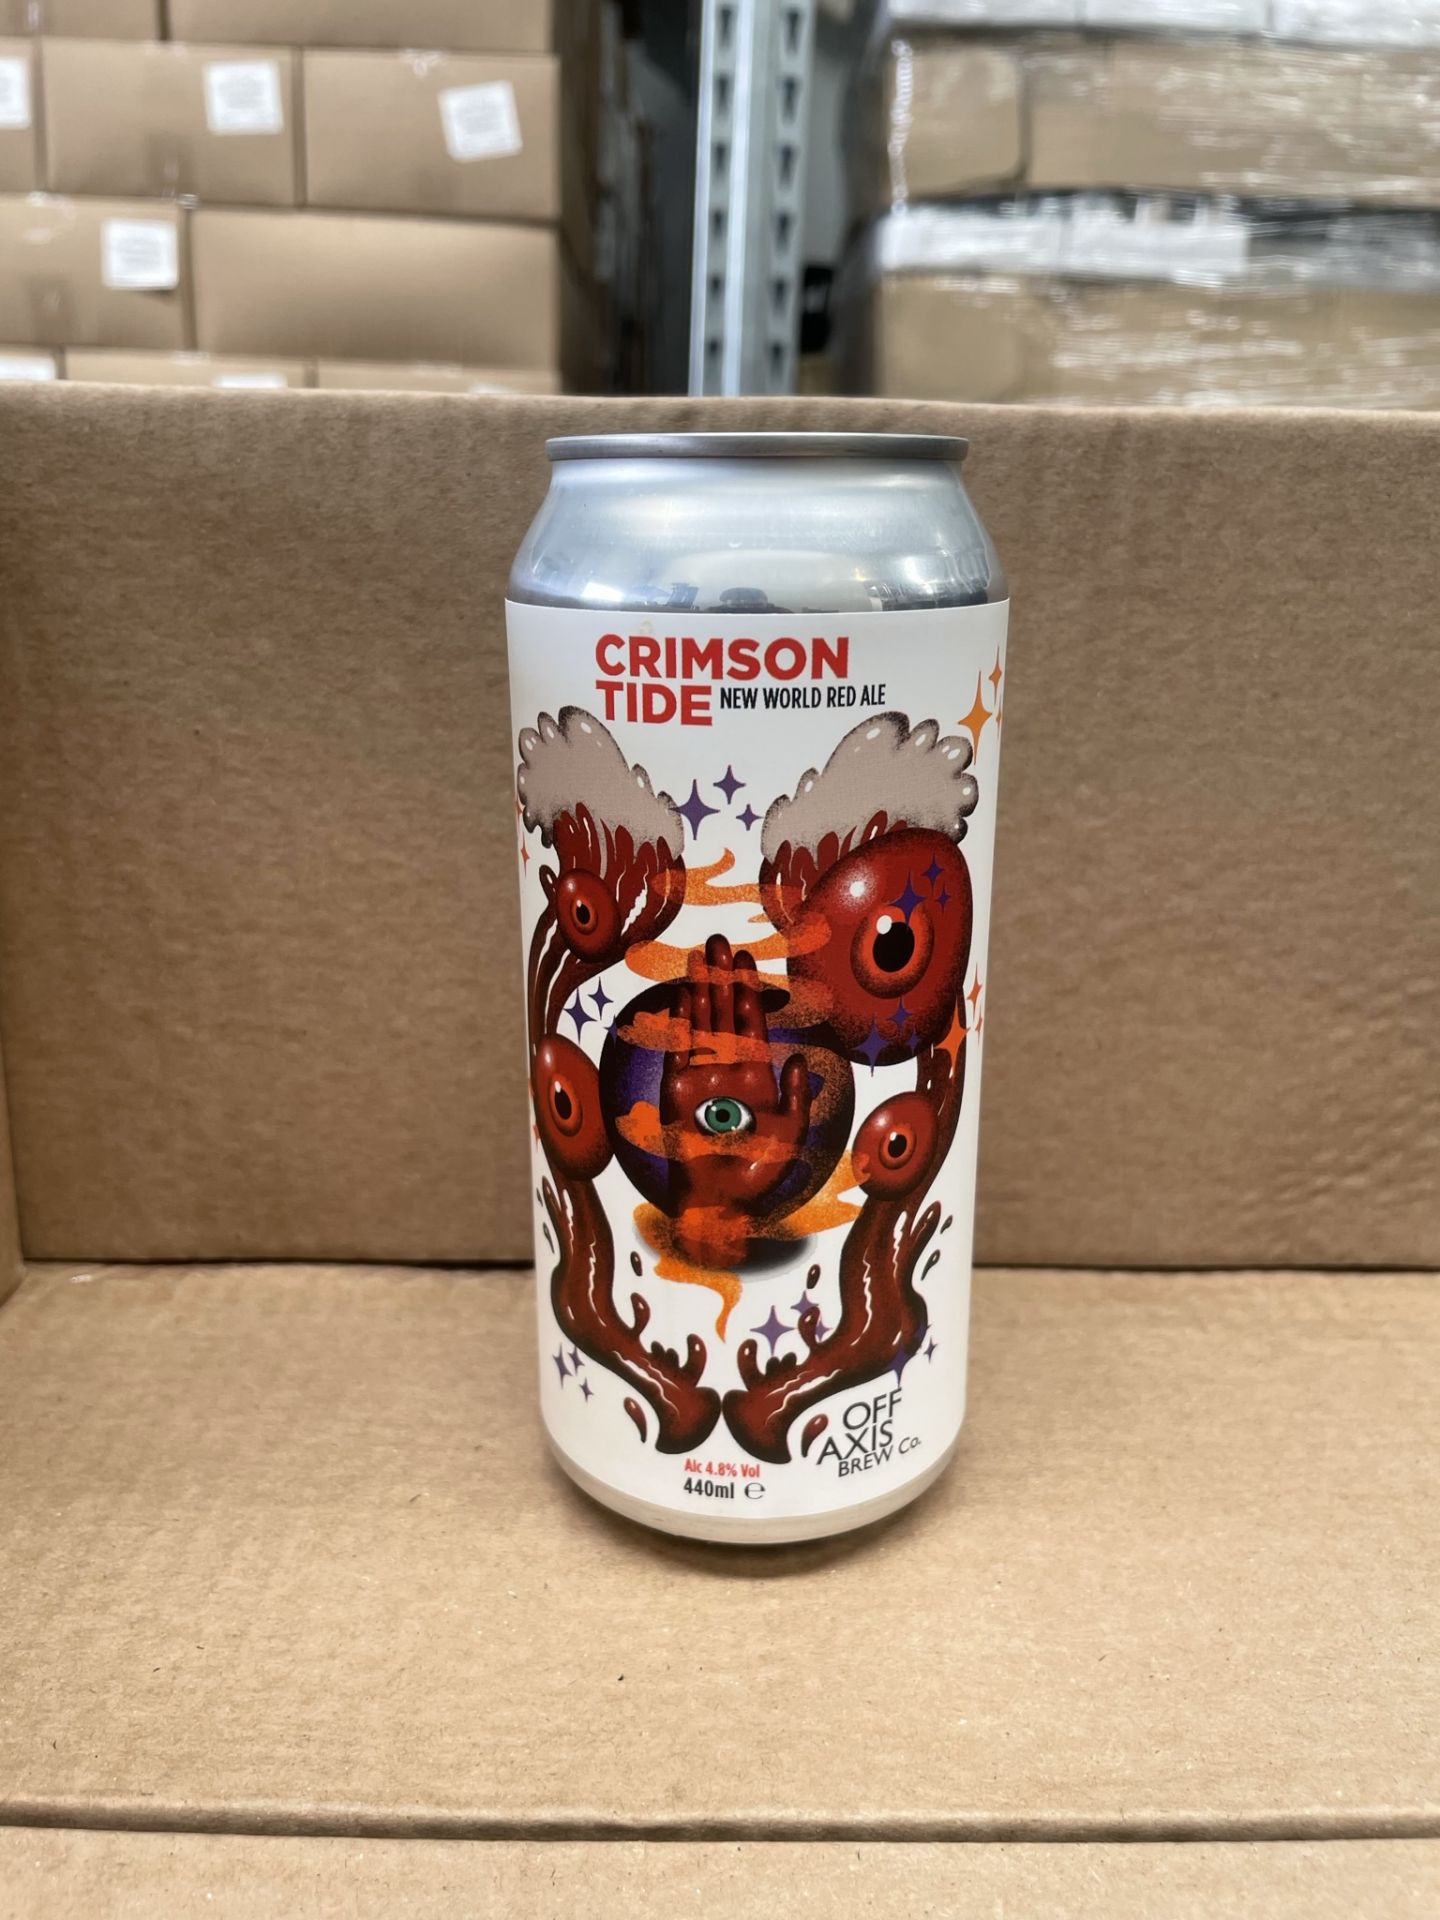 Approximately 624 x 440ml Cans of Off Axis Brew Co 'Crimson Tide' New World Red Ale | BB: 24/07/23 |